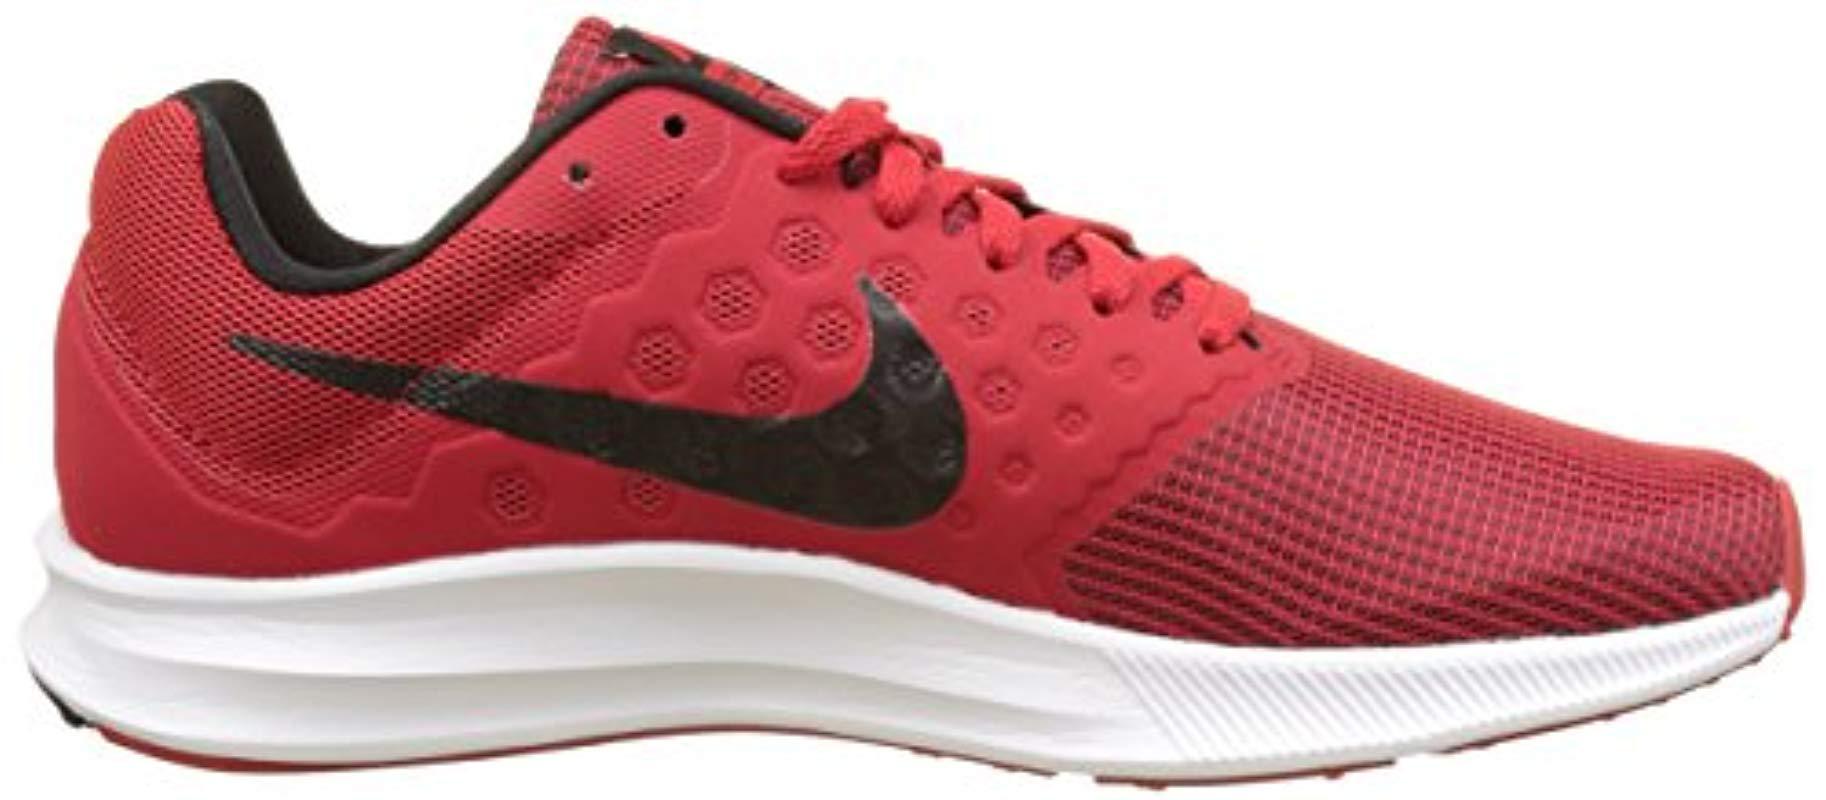 Nike Downshifter 7 Red Online Sale, UP TO 58% OFF